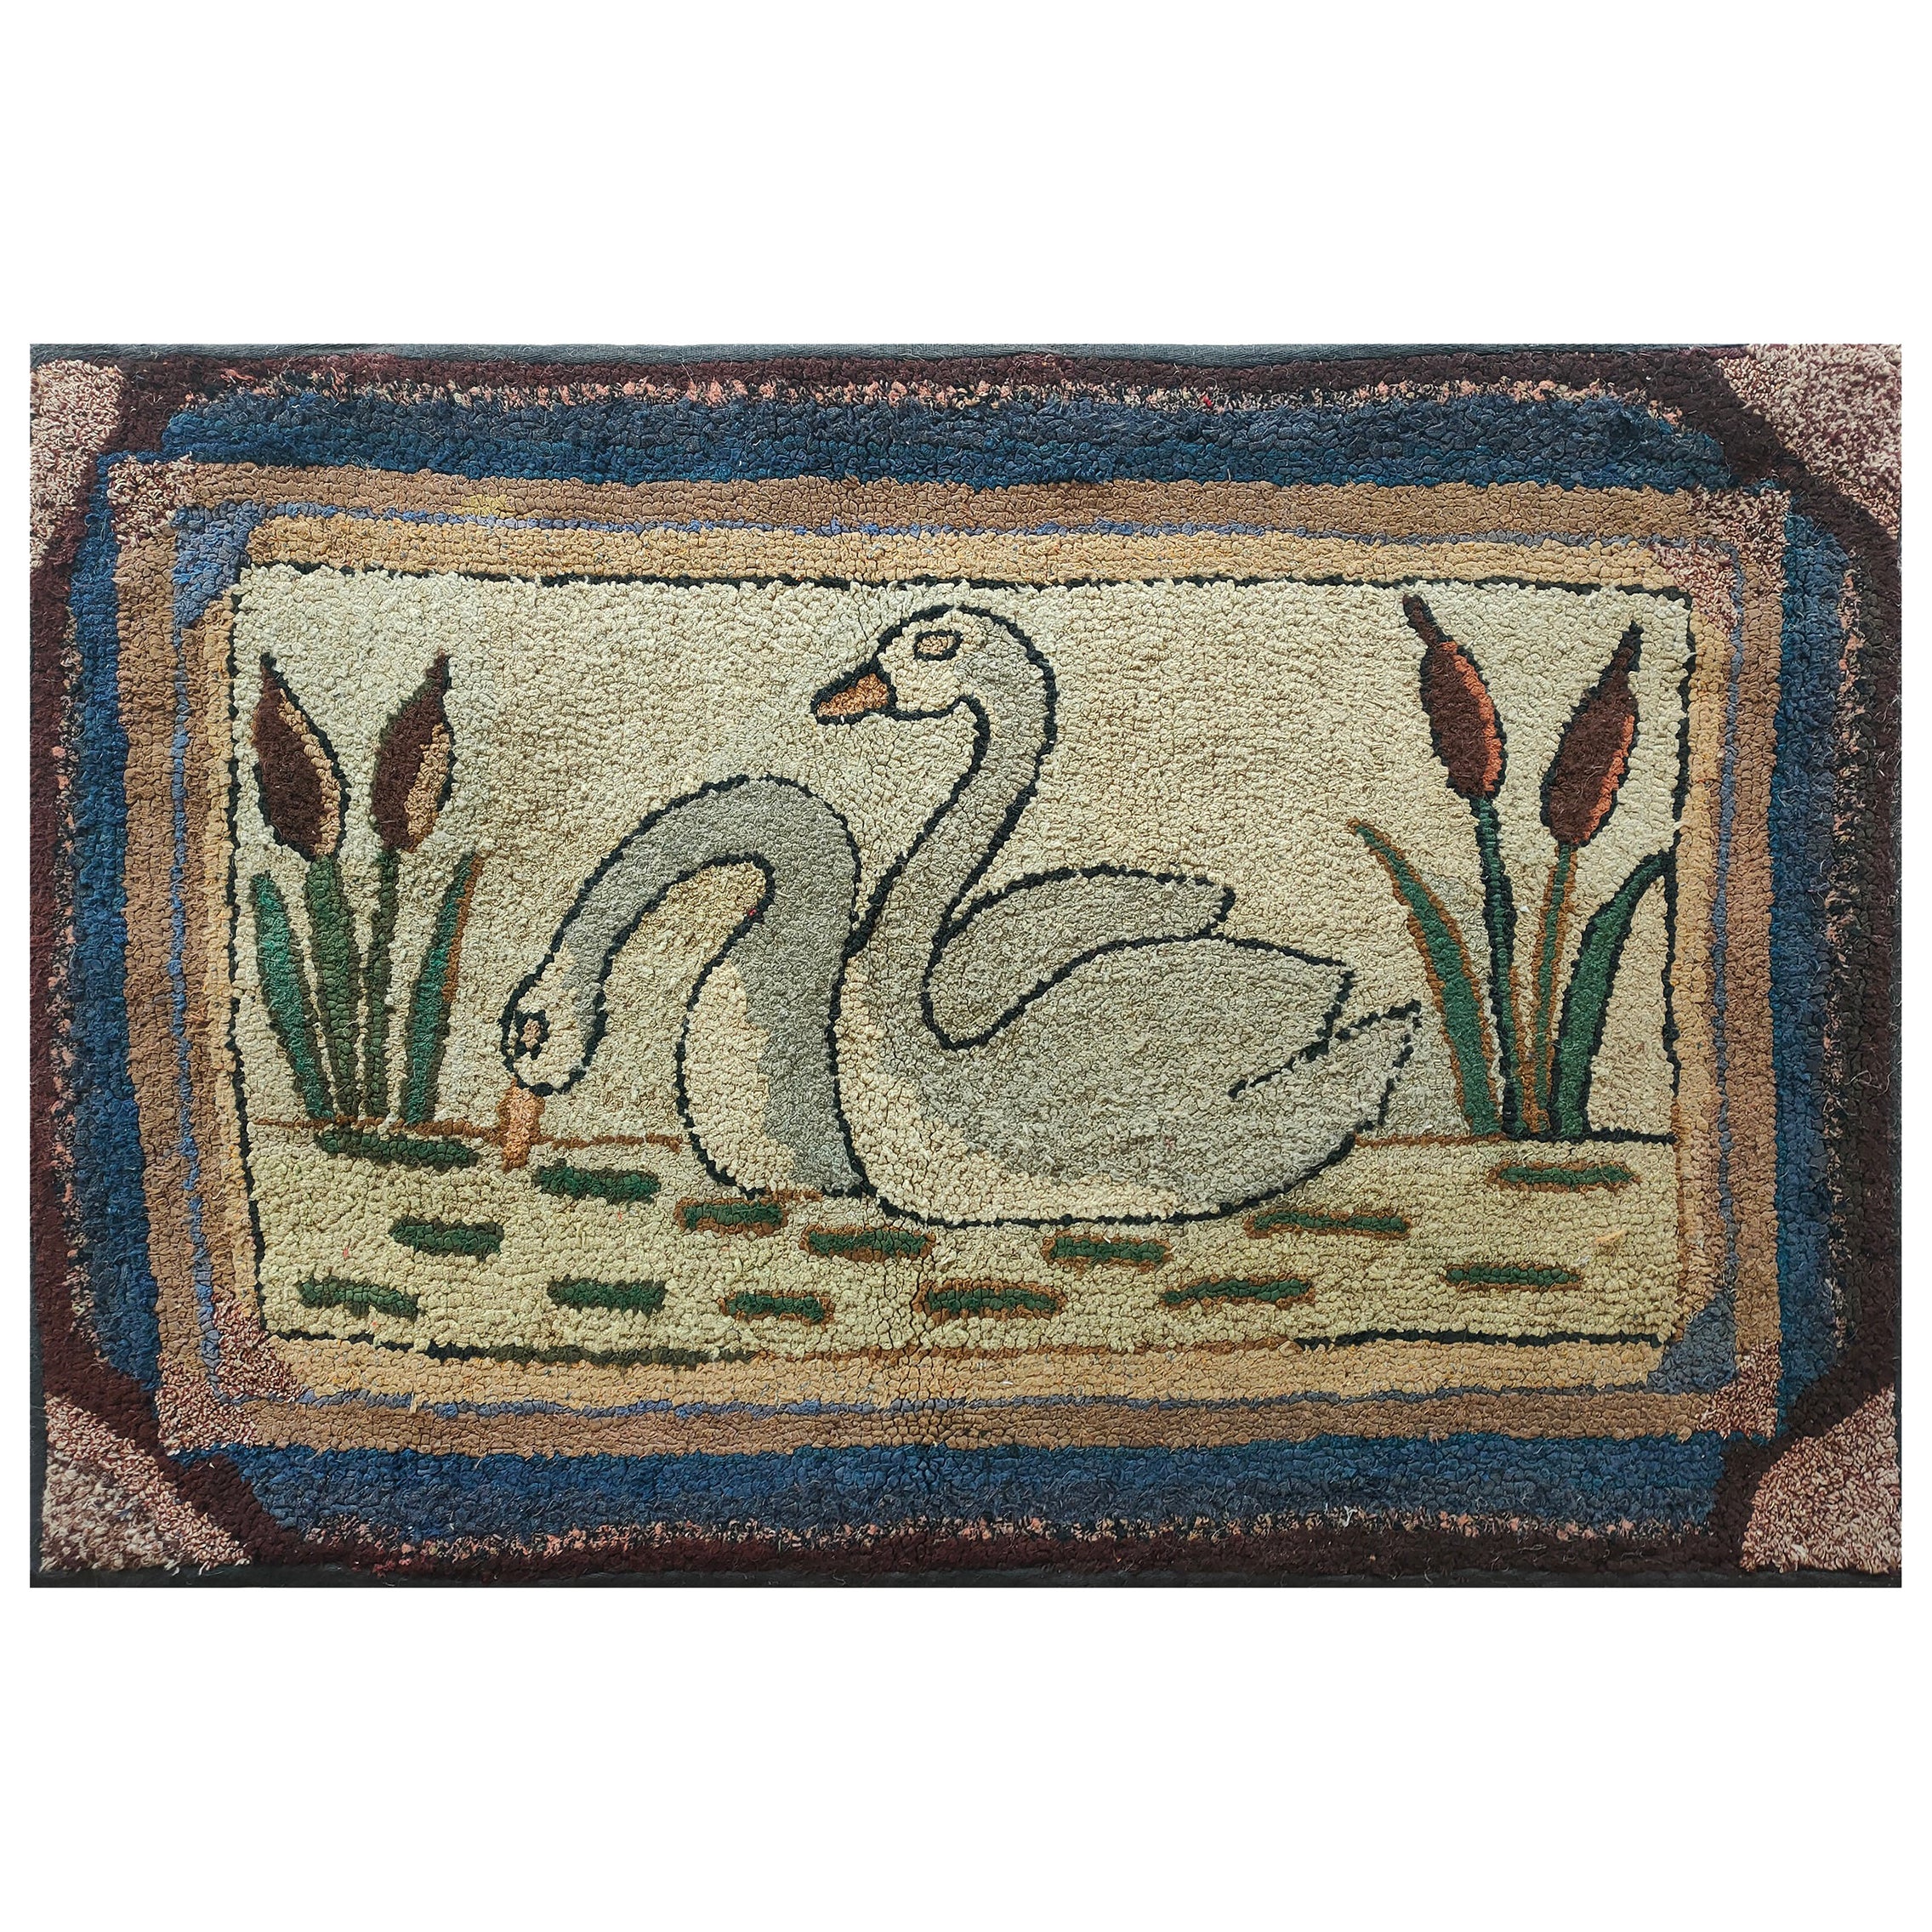 Mid 20th Century Pictorial American Hooked Rug ( 2'4" x 3'7" - 72 x 110 )